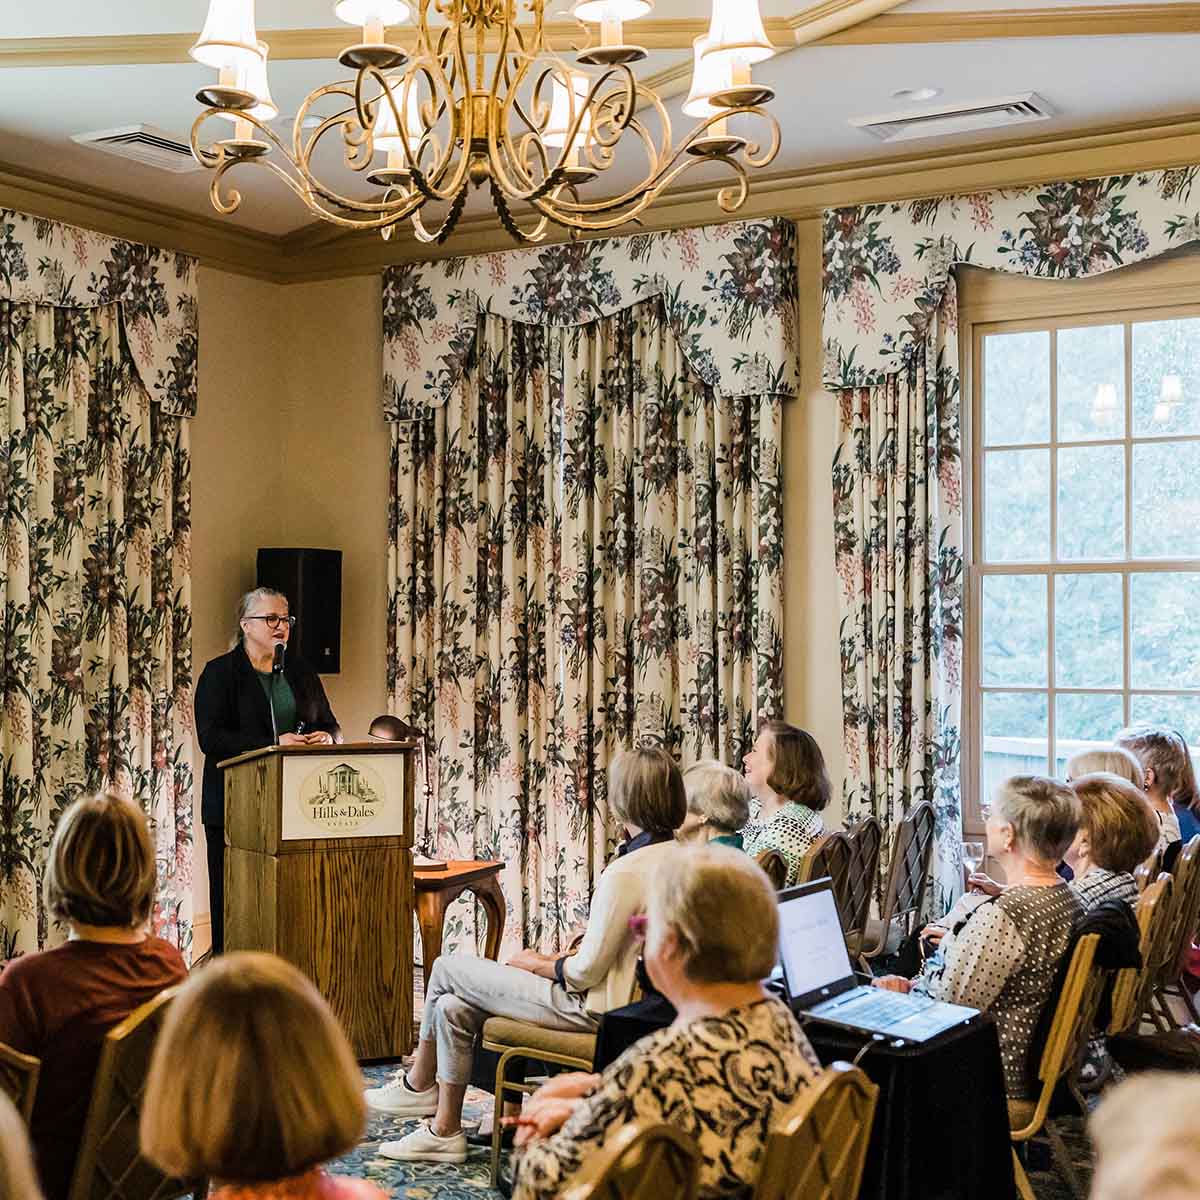 A speaker presents during an event in the Hills & Dales Estate visitor center.